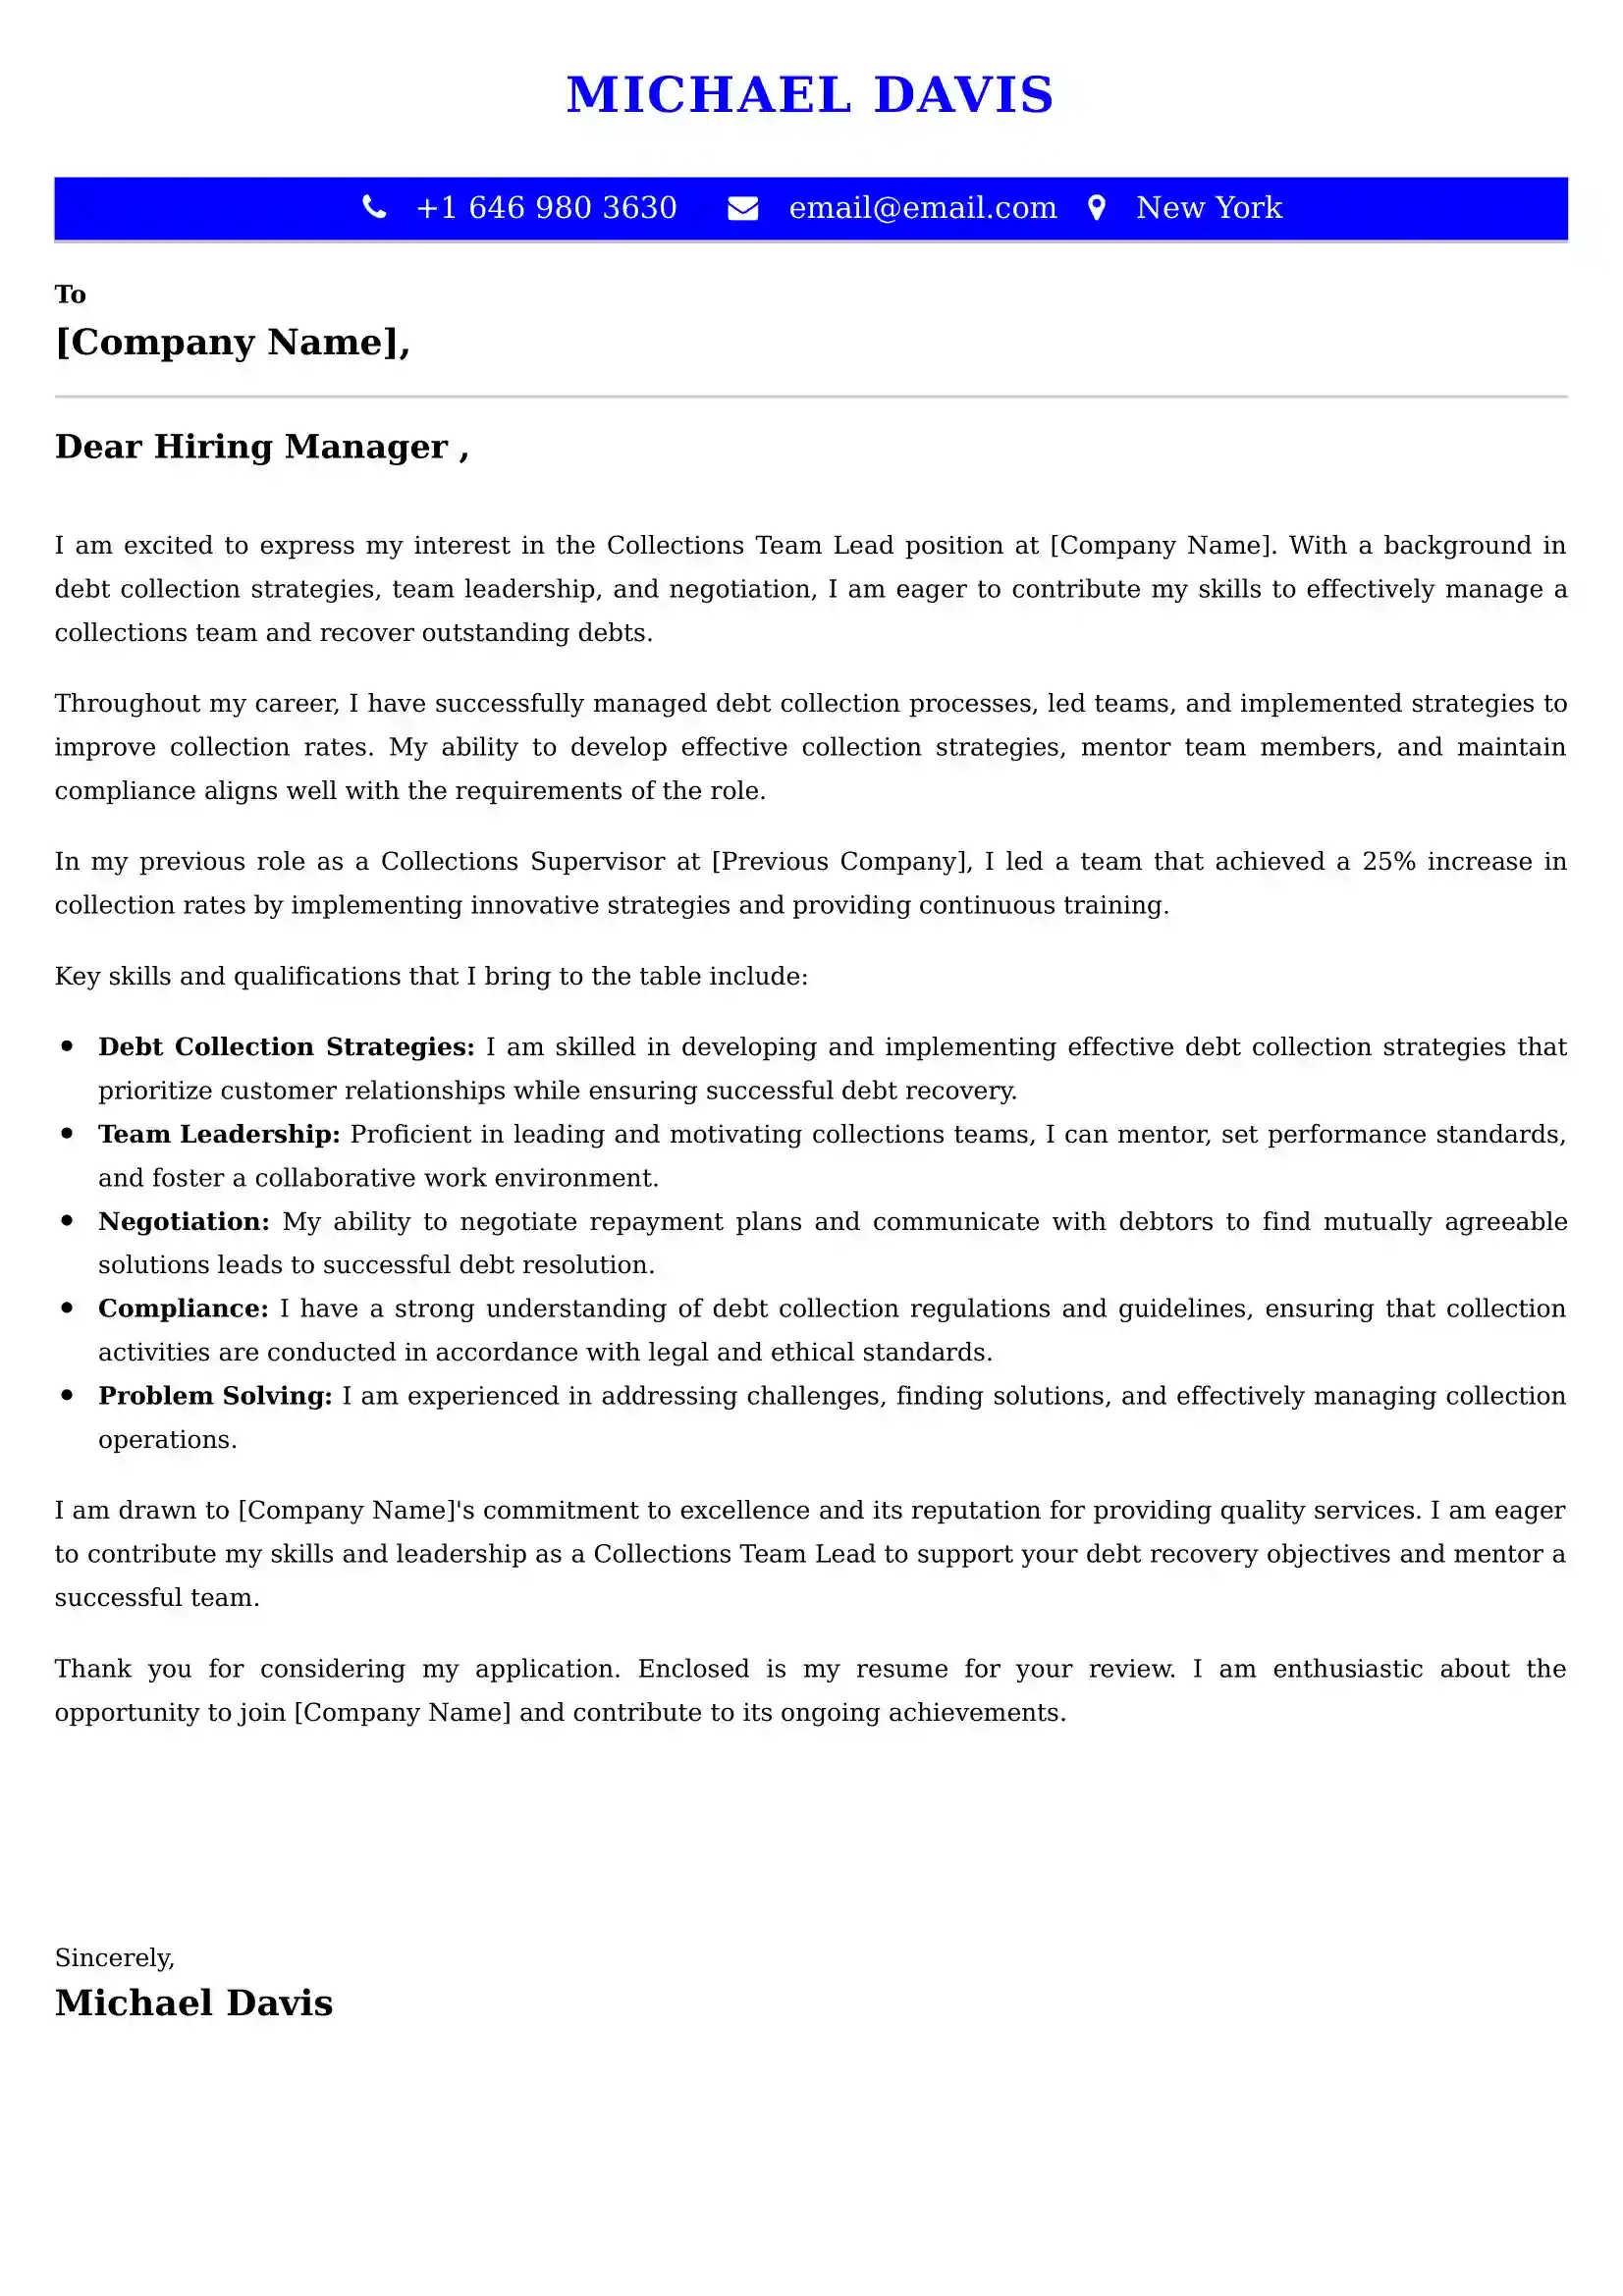 Collections Team Lead Cover Letter Examples UK - Tips and Guide